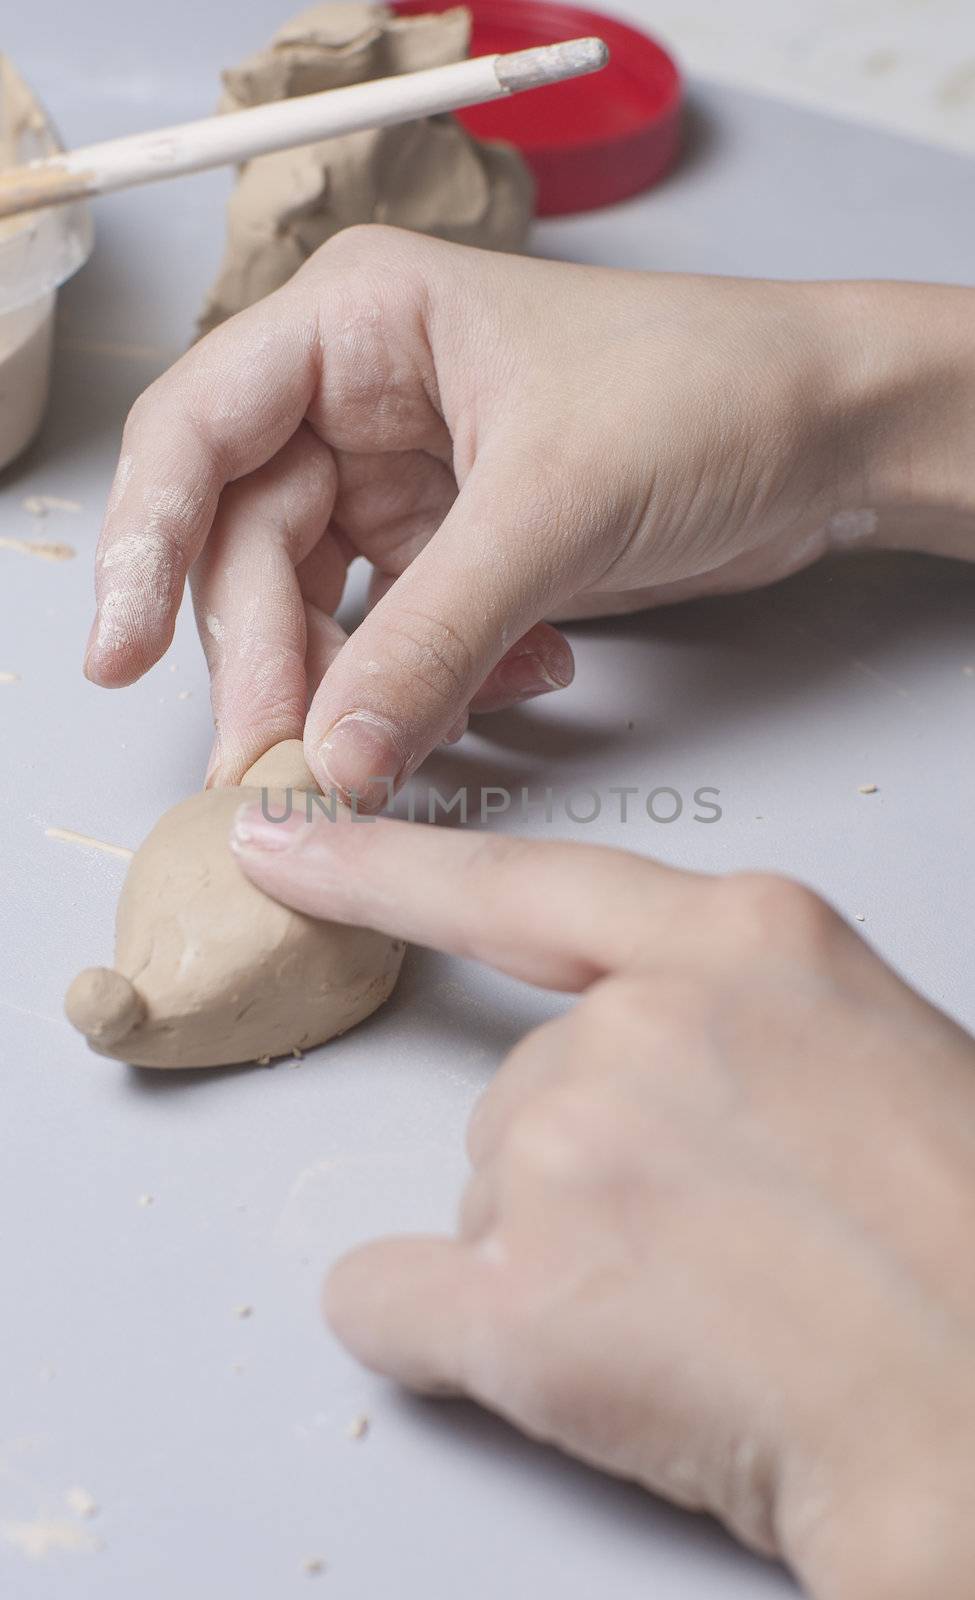 Girl make toyfrom clay. High resolution image.